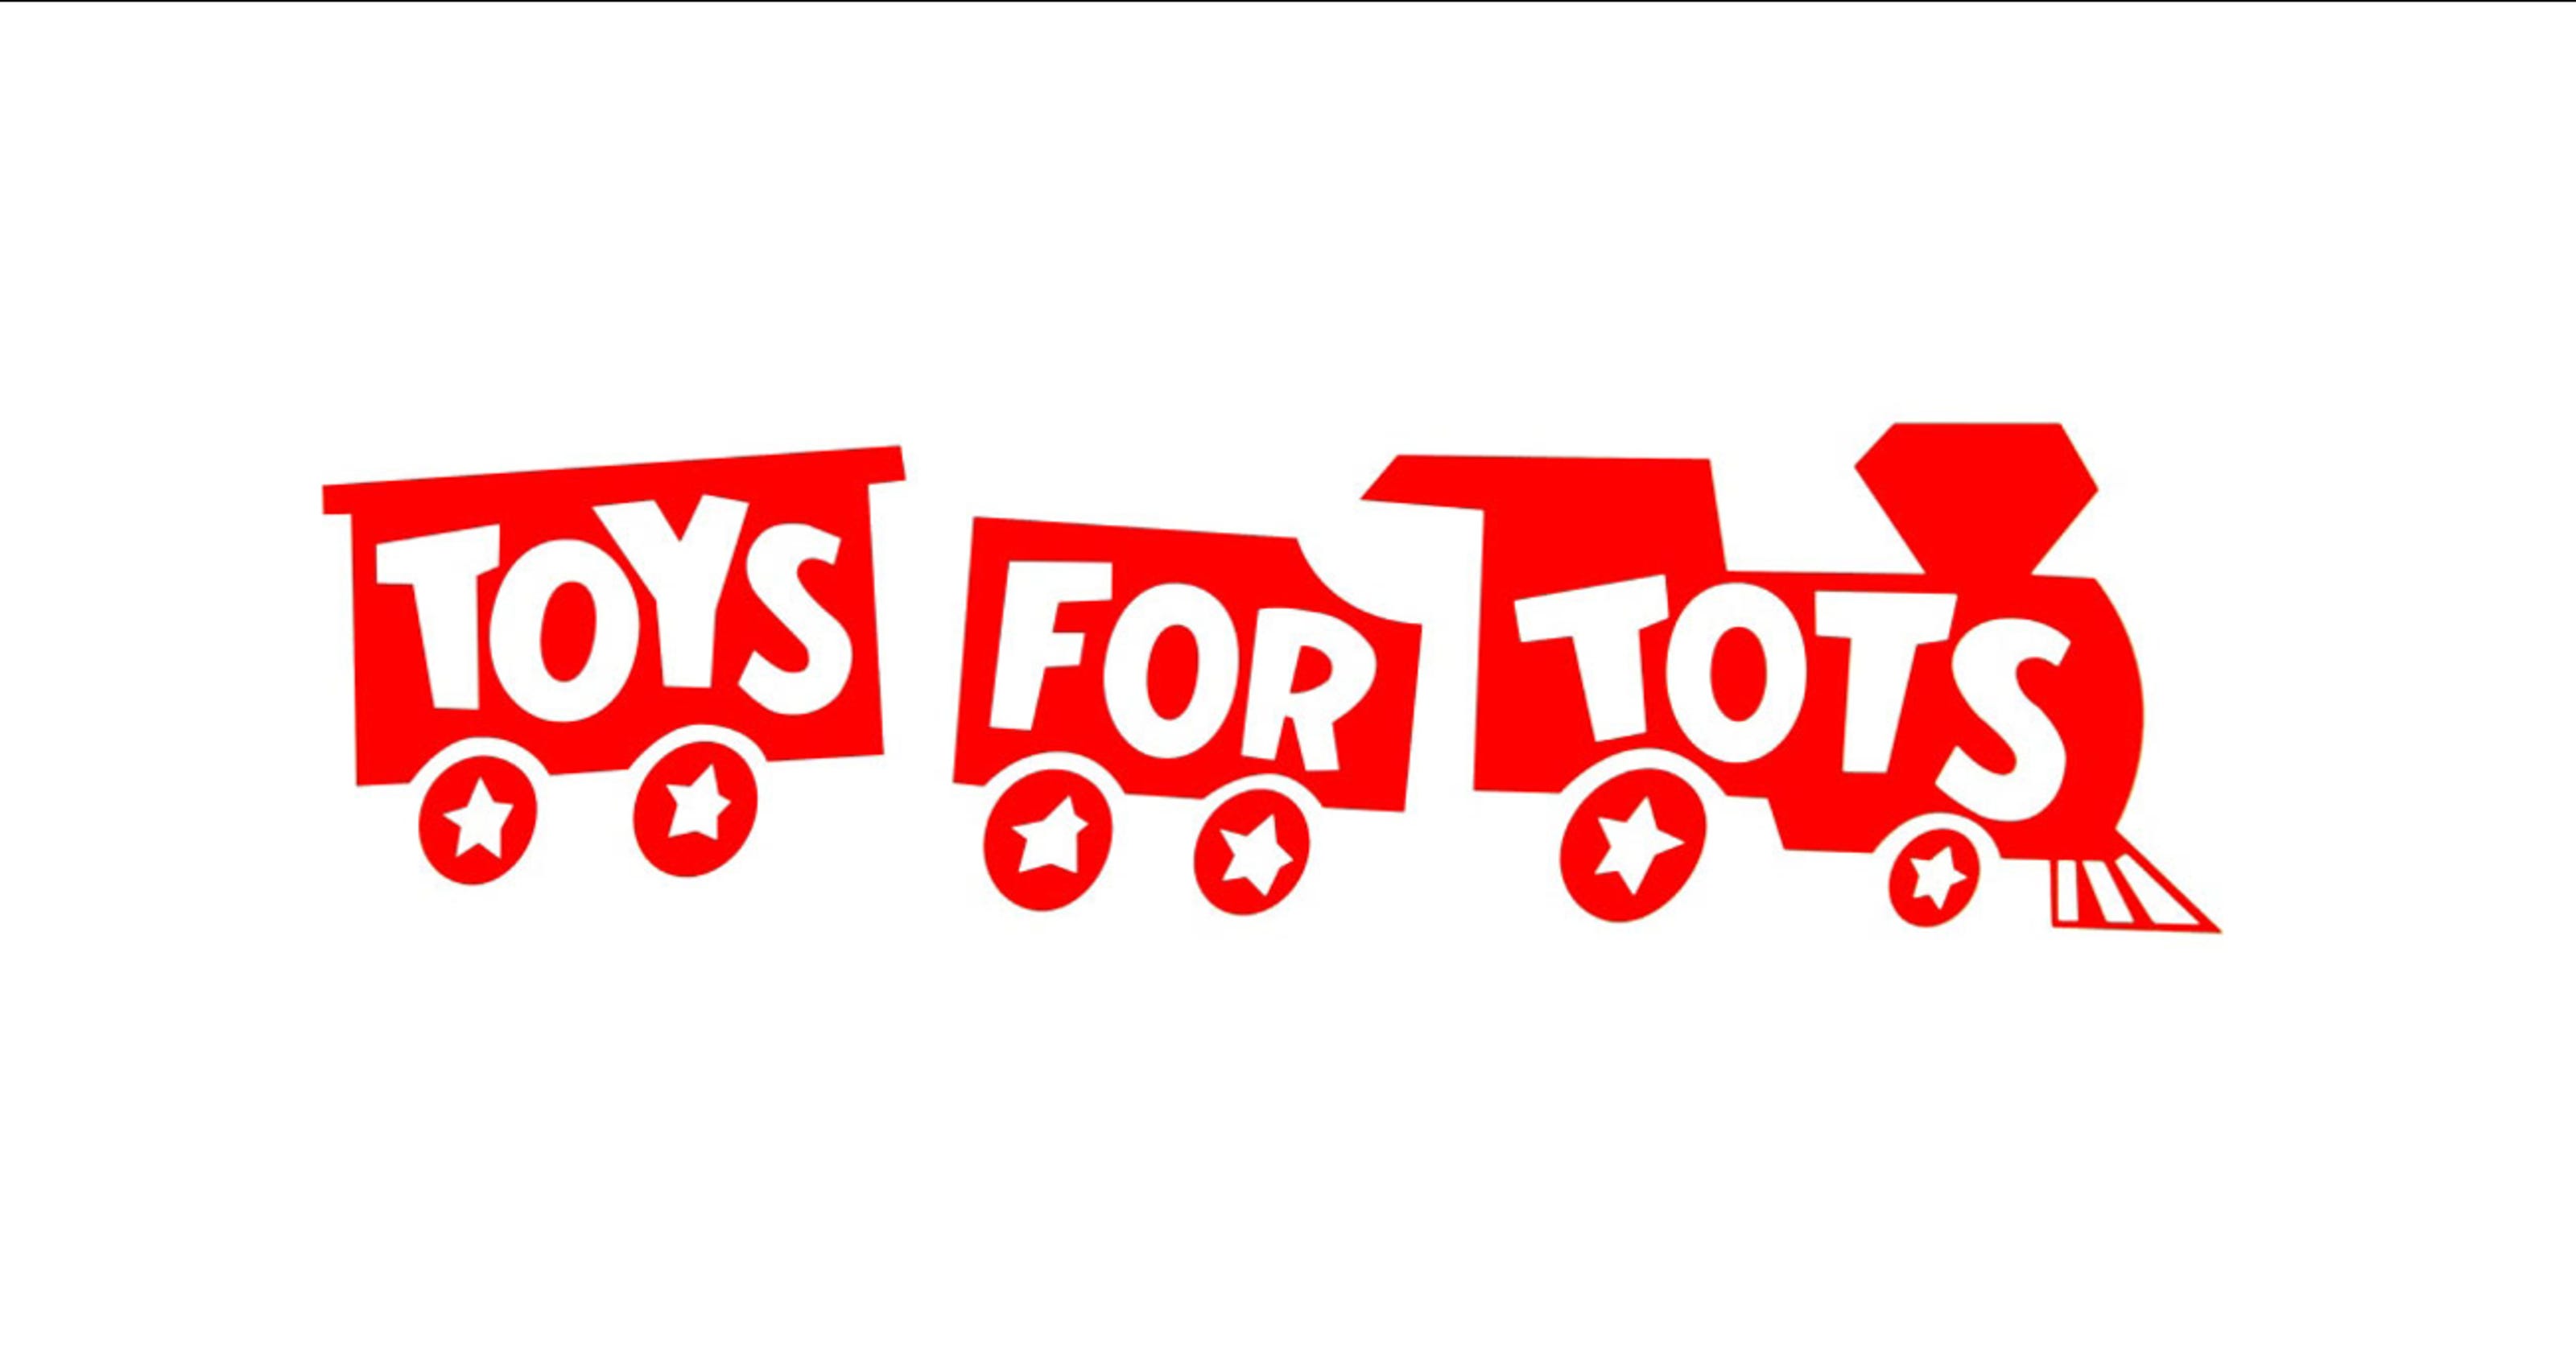 The 2018 Toys for Tots campaign is underway!